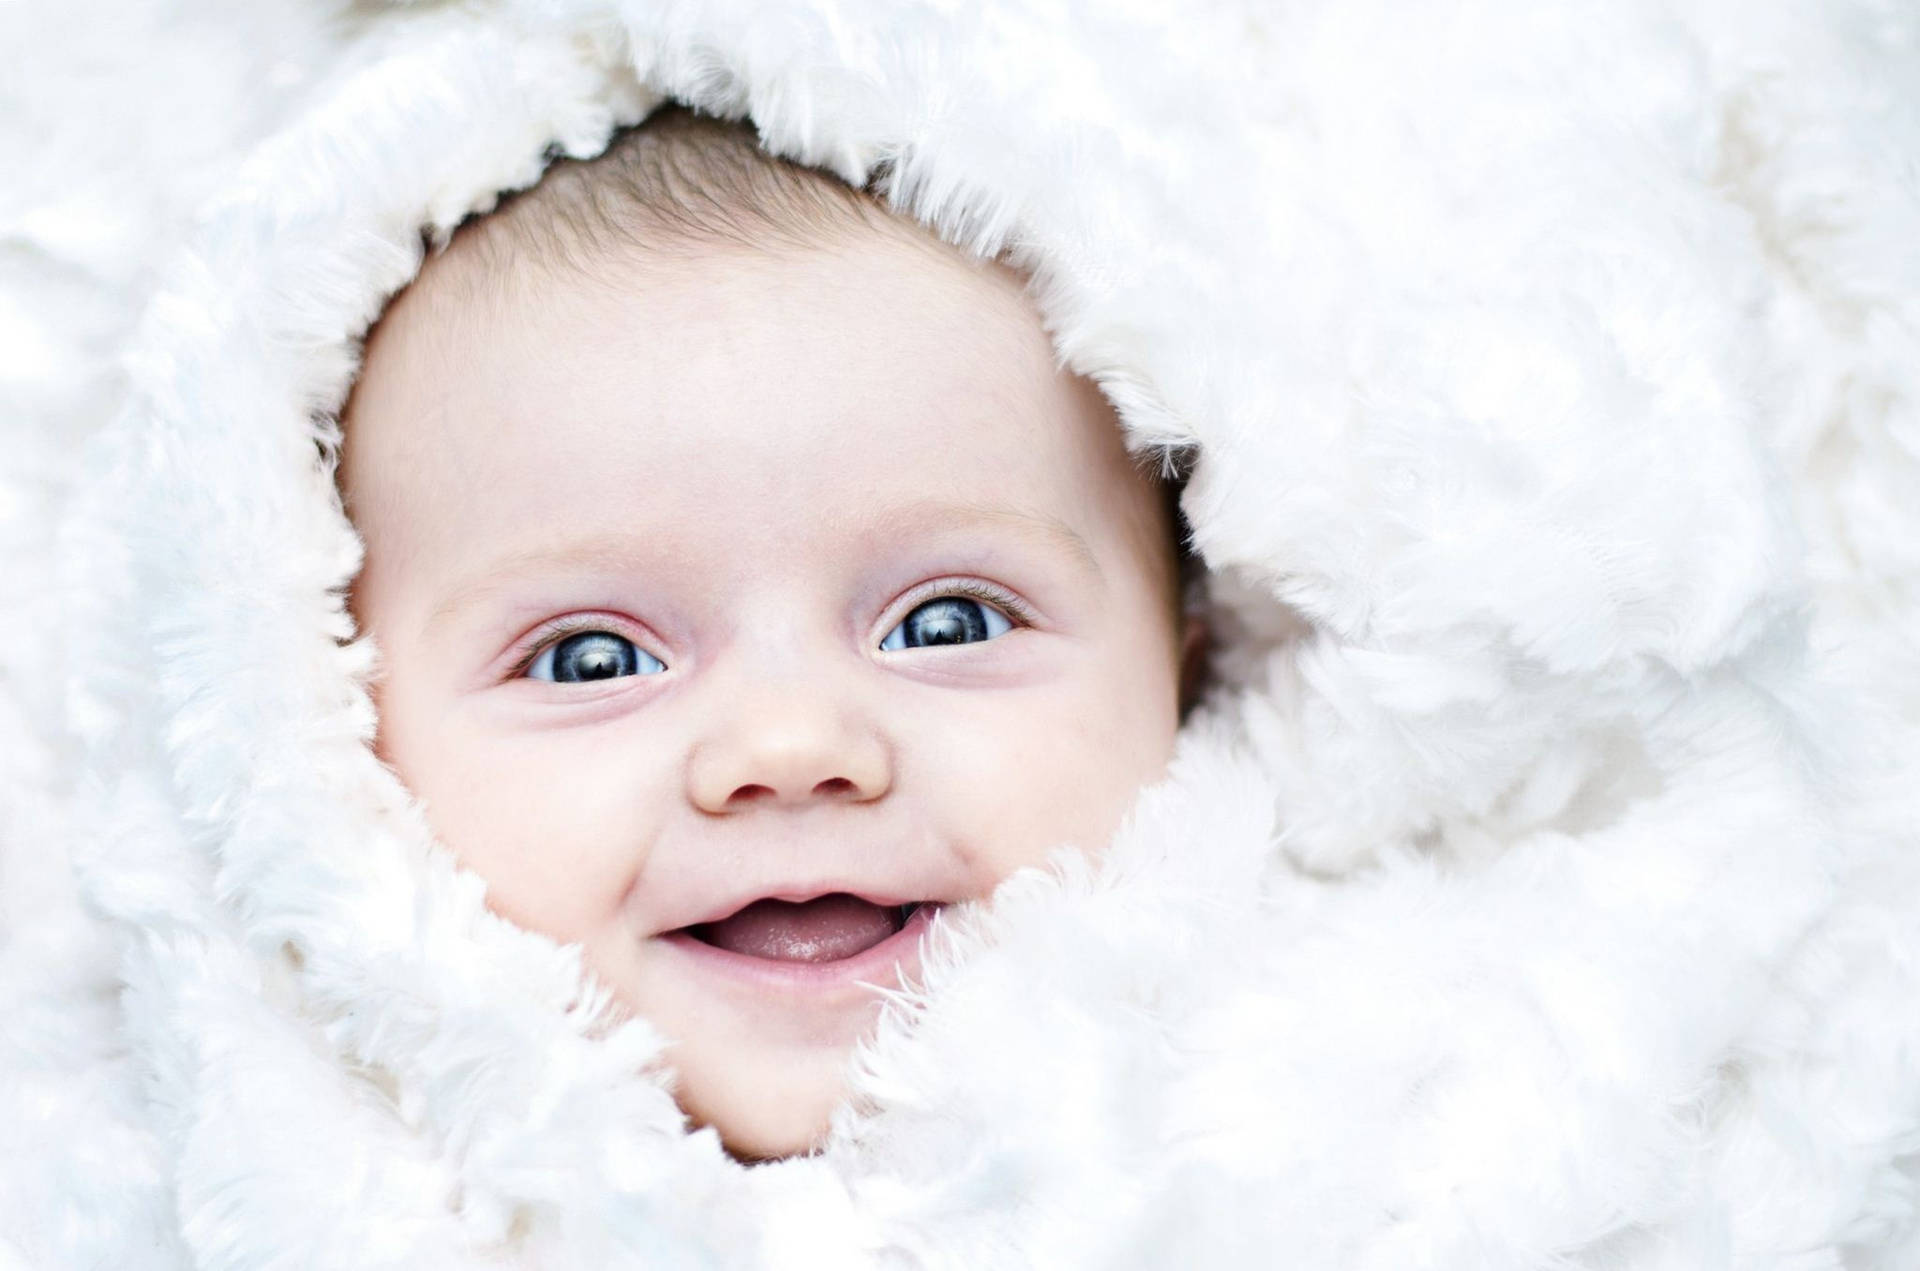 Adorable Newborn Smiling Blissfully - Baby Photography Wallpaper